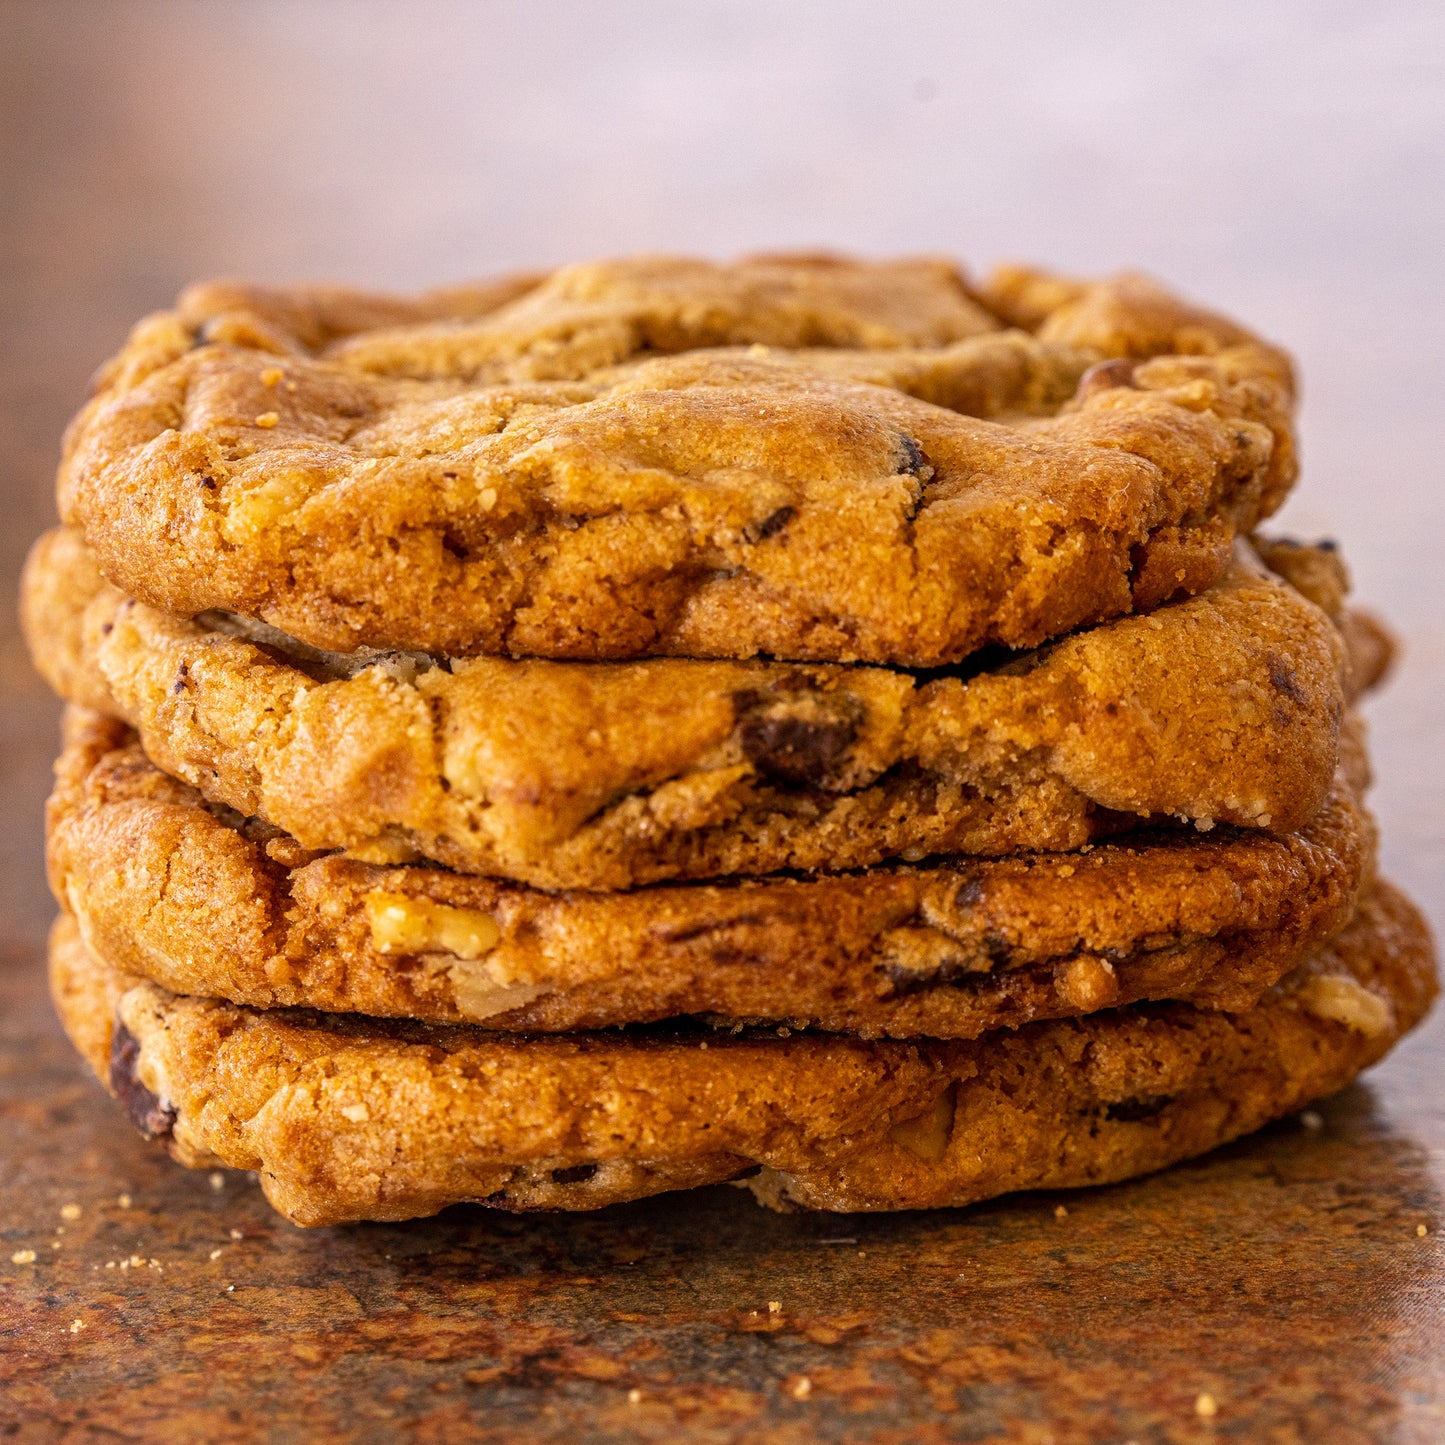 Chocolate Chip With Walnut Cookie 4 pack